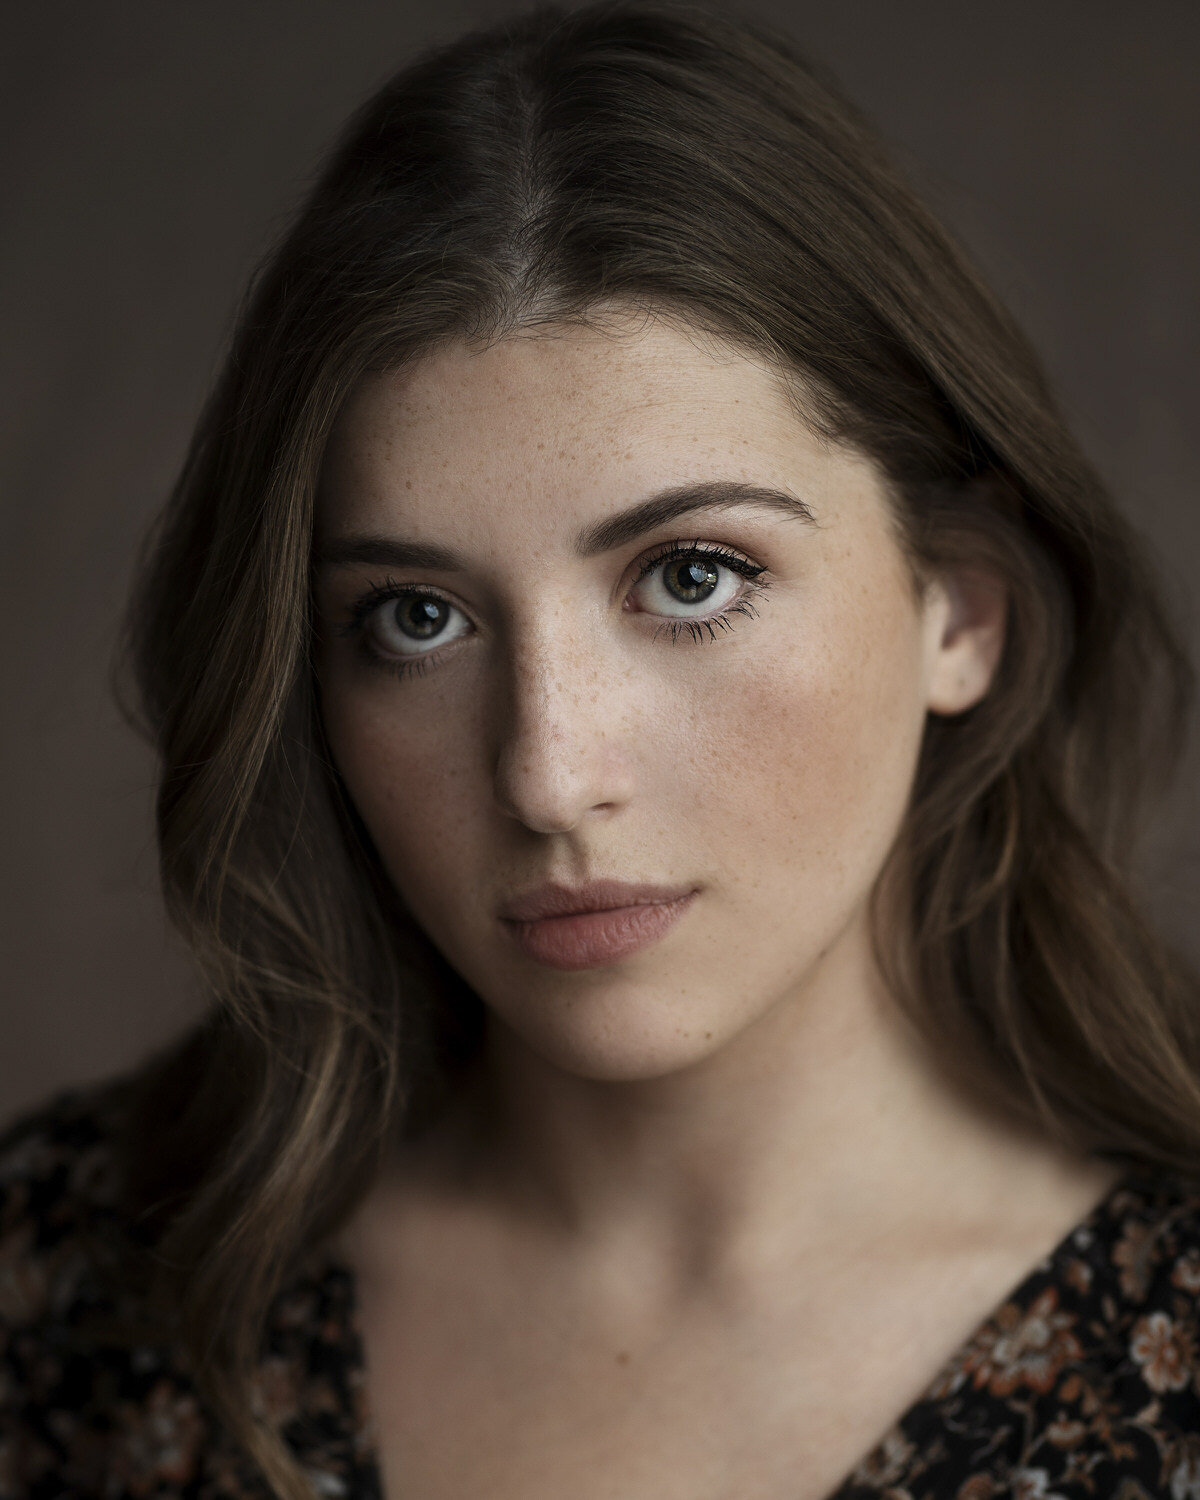  Actor headshot of Isabella Vance by photographer Roger Kenny 